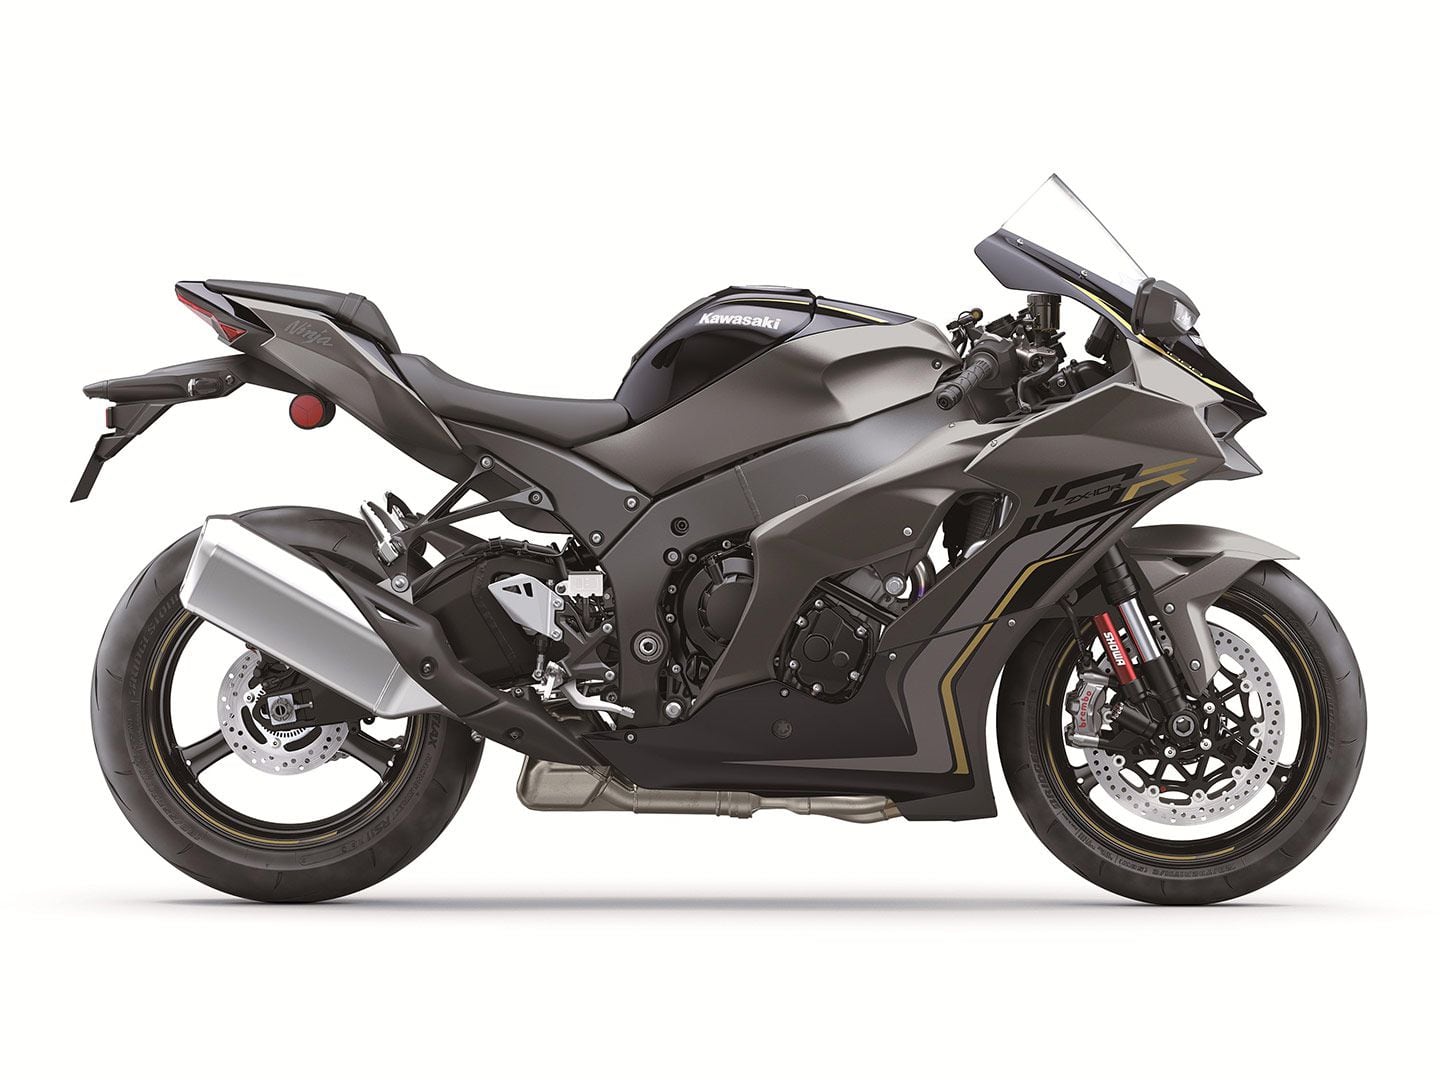 The 2023 Kawasaki Ninja ZX-10R is available in a gray/metallic black color. MSRP is $17,399